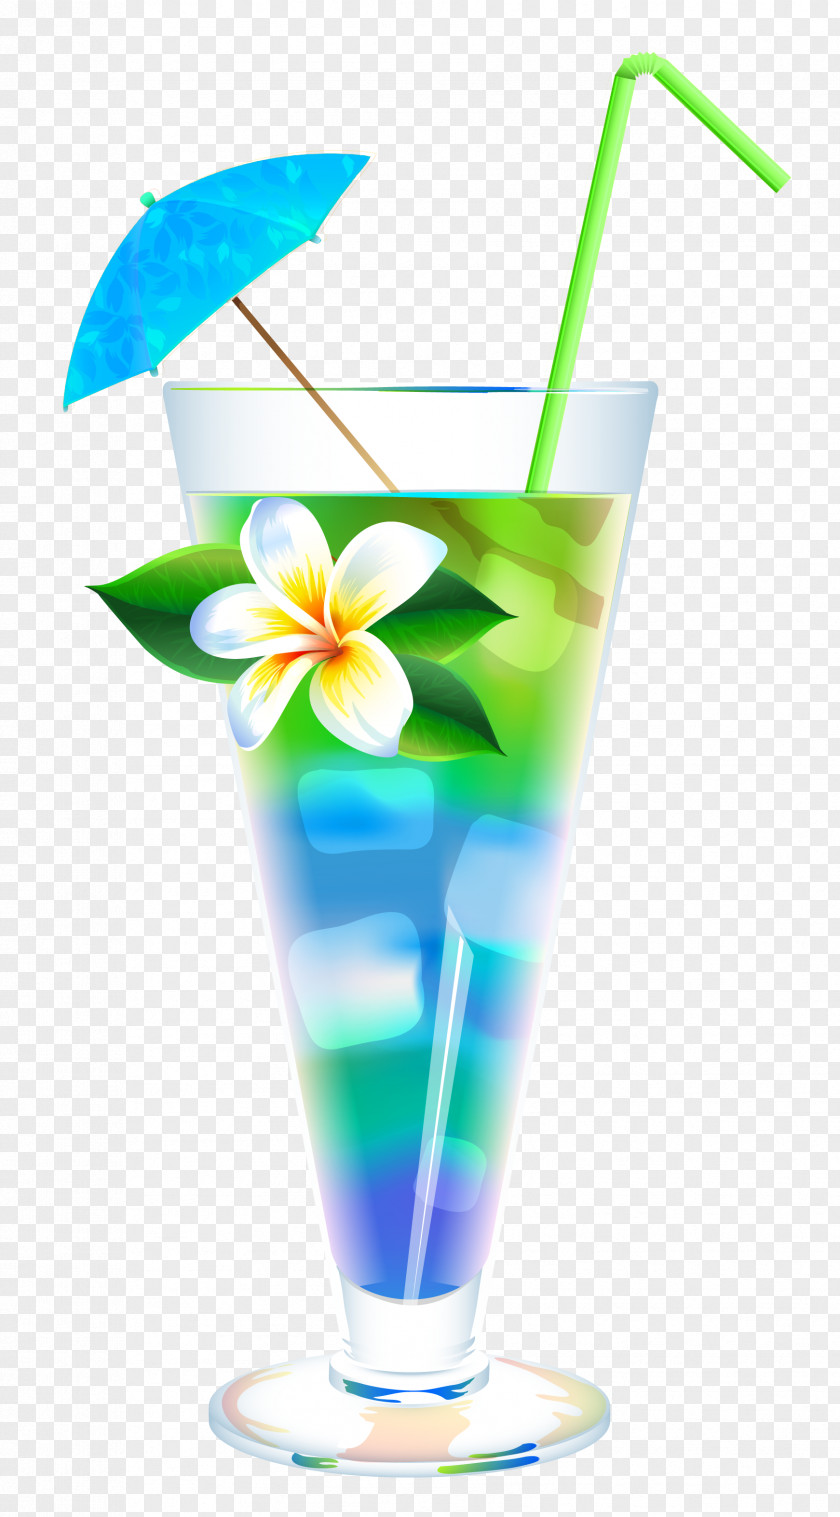 Exotic Summer Cocktail Clipart Image Cosmopolitan Martini Blue Lagoon Tequila Sunrise PNG